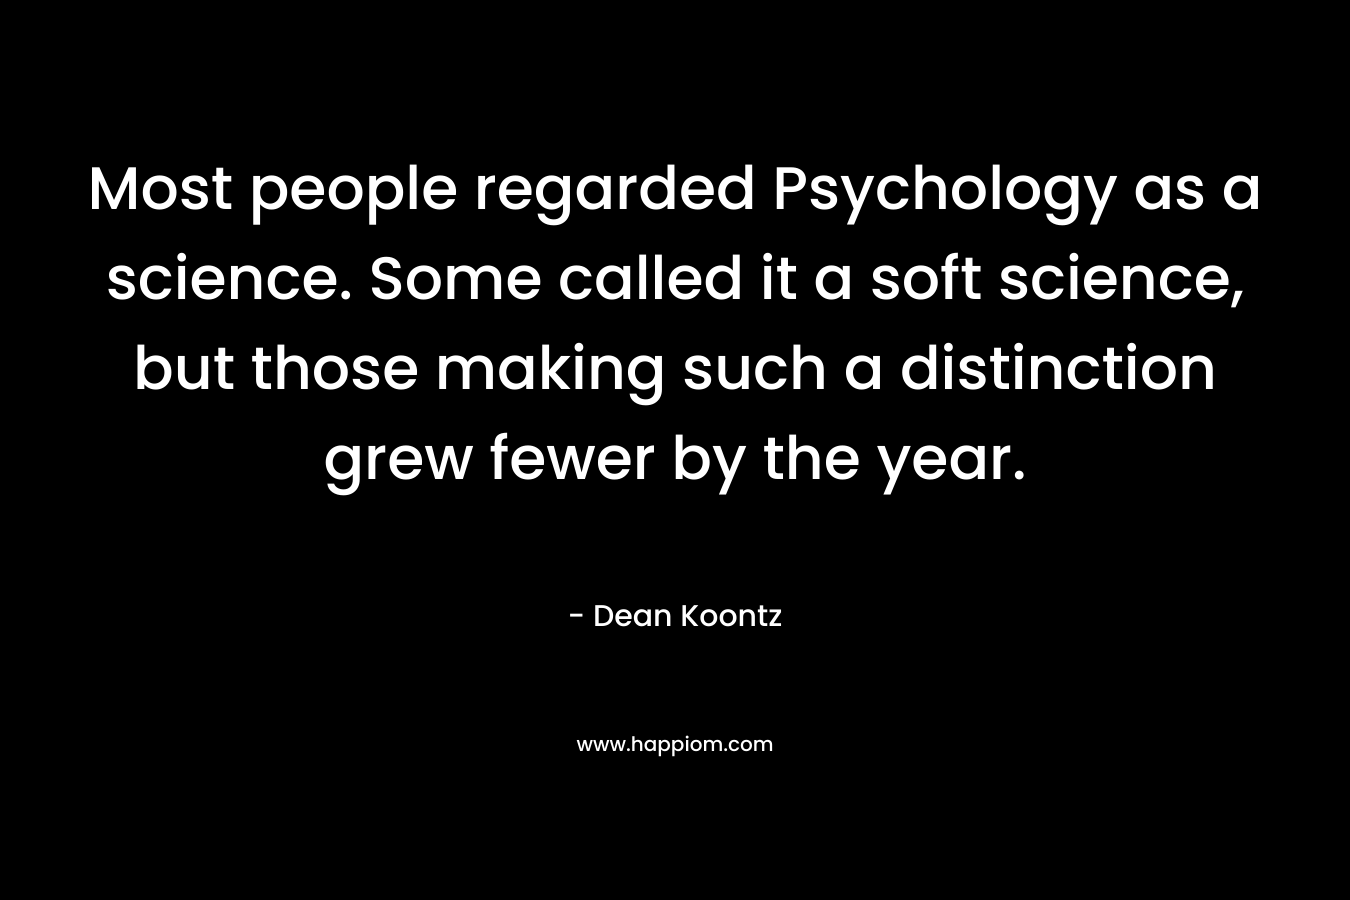 Most people regarded Psychology as a science. Some called it a soft science, but those making such a distinction grew fewer by the year.